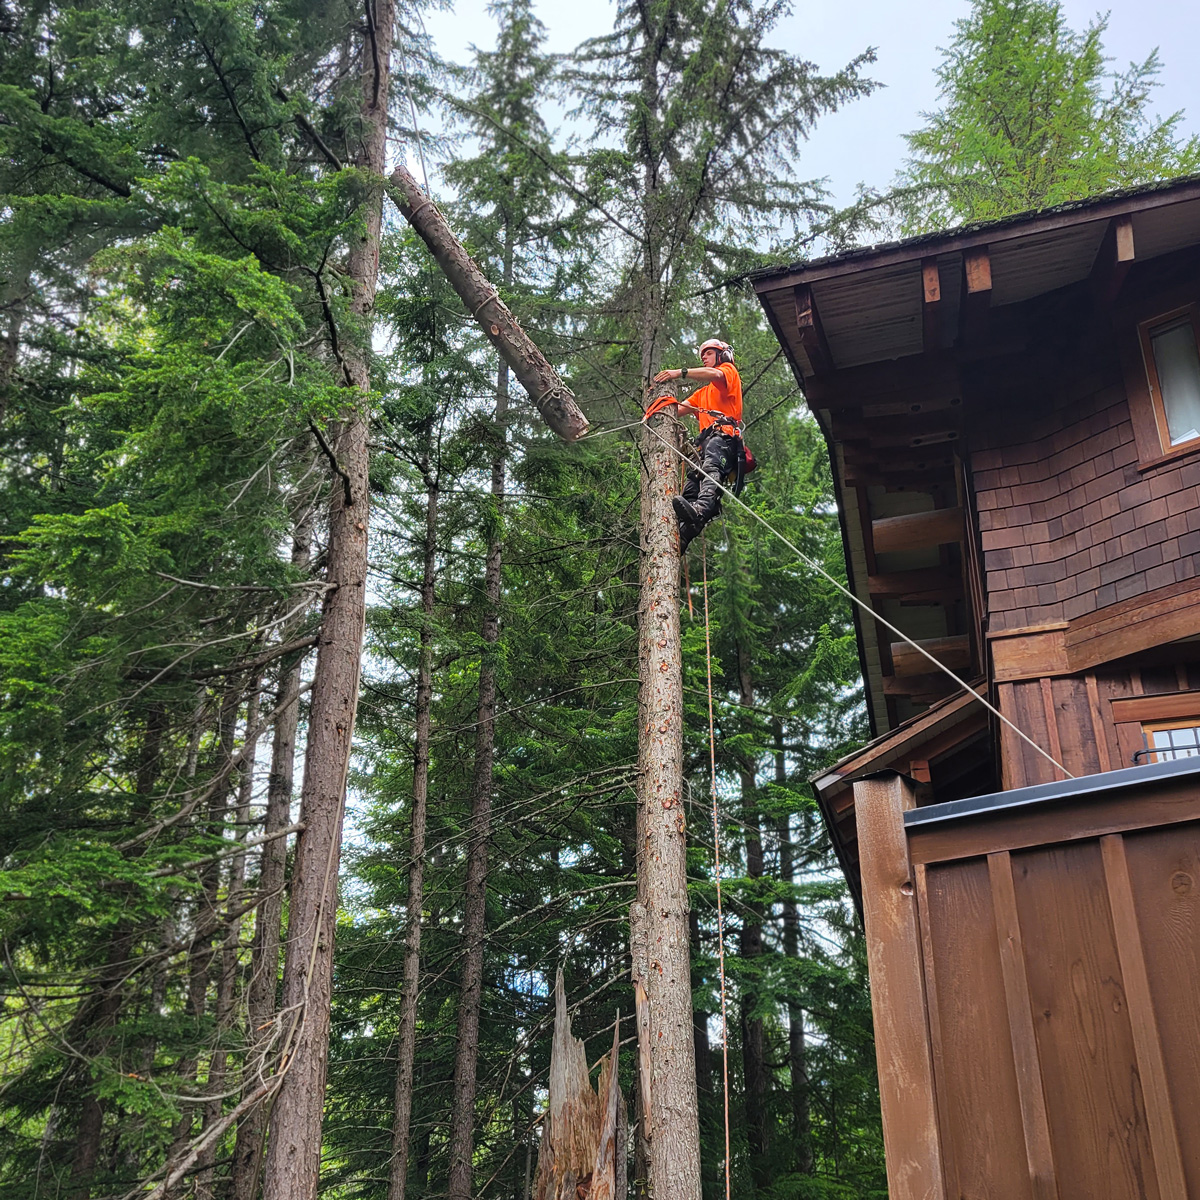 A Garibaldi Tree, tree care company, employee is removing a tree beside a house in Whistler, B.C. He is throwing a portion of the tree away from the base, which is harnessed into. He is wearing a bright orange shirt.